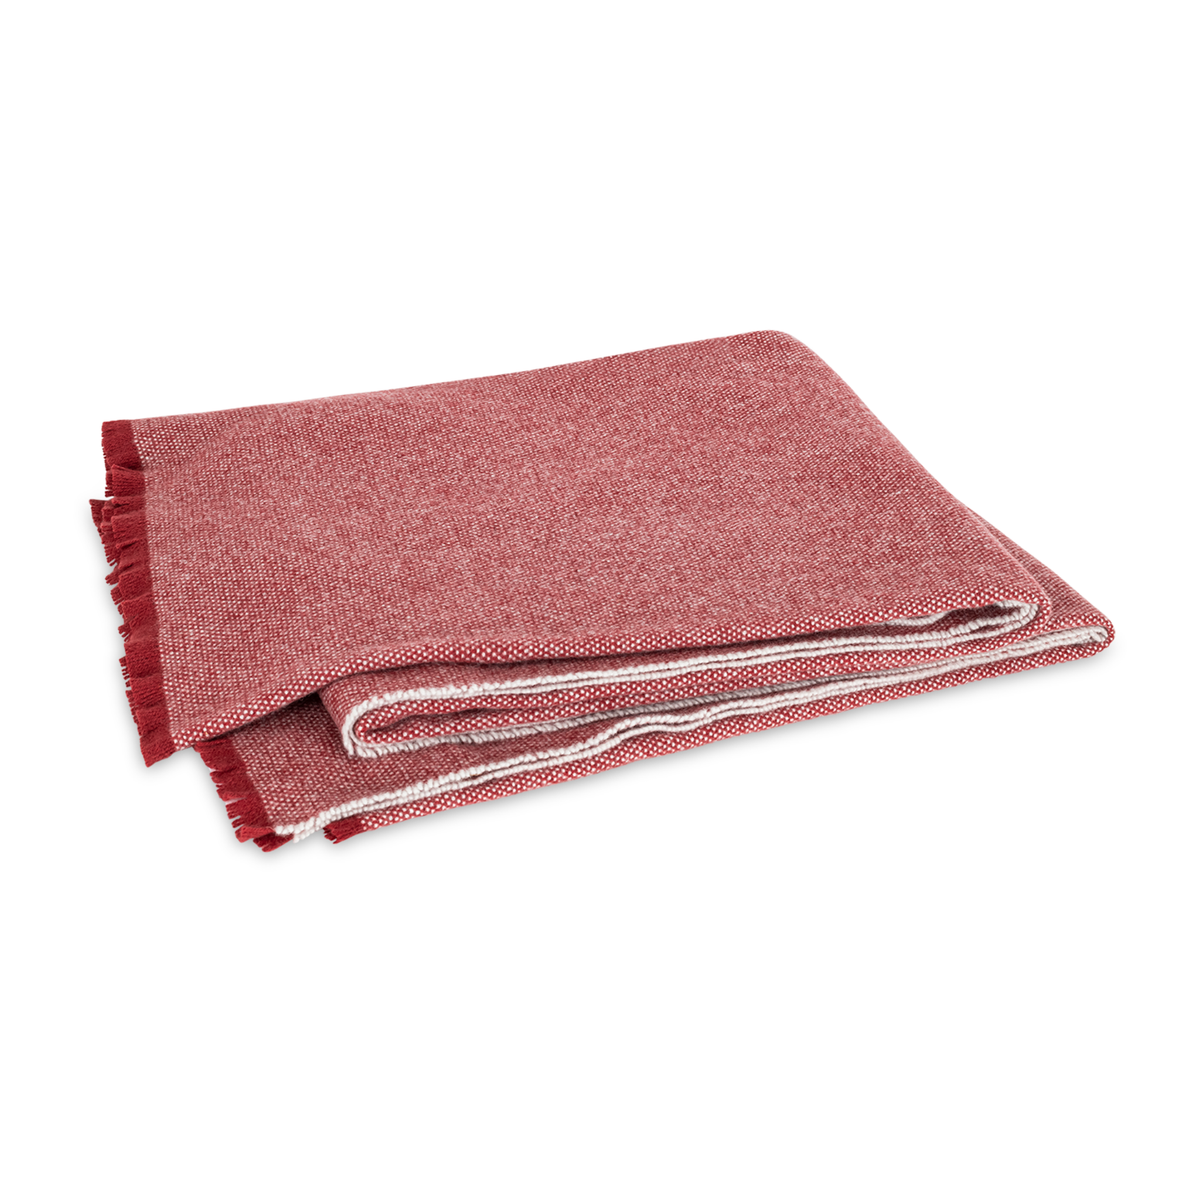 Folded Matouk Agnes Throw in Carnelian Color Against White Background